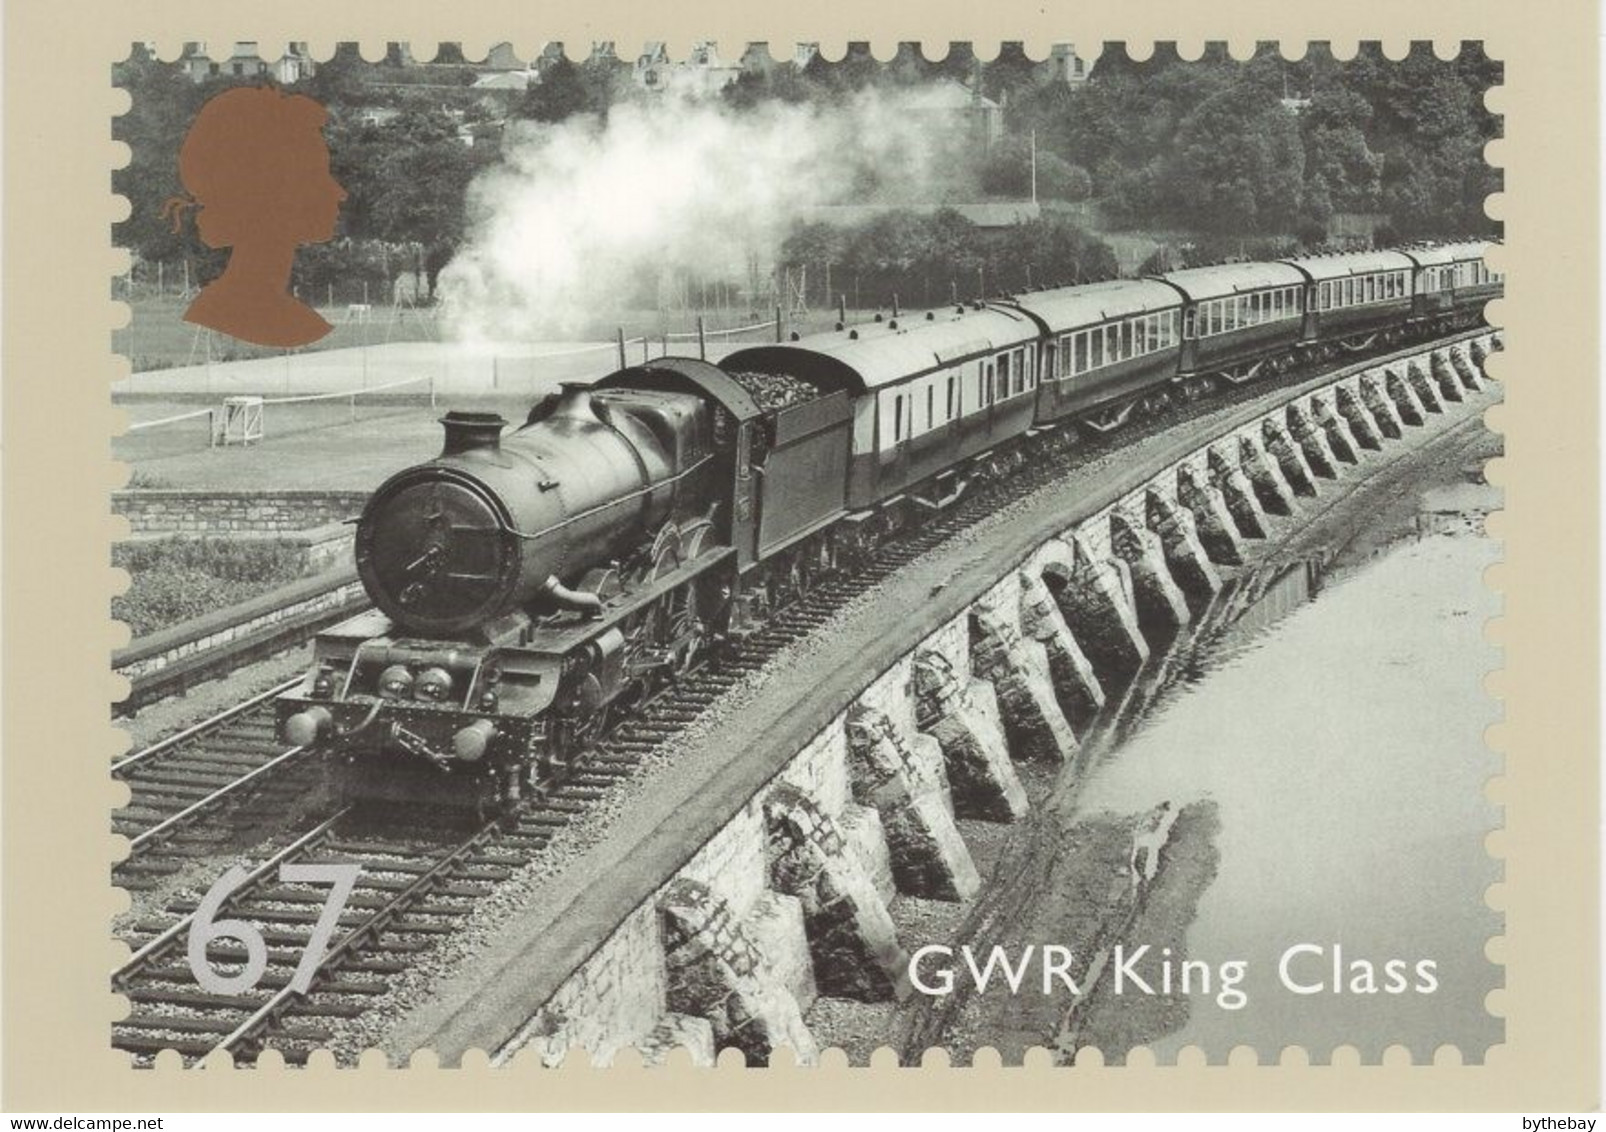 Great Britain 2010 PHQ Card Sc 2829 67p GWR King Class Locomotive - PHQ Cards